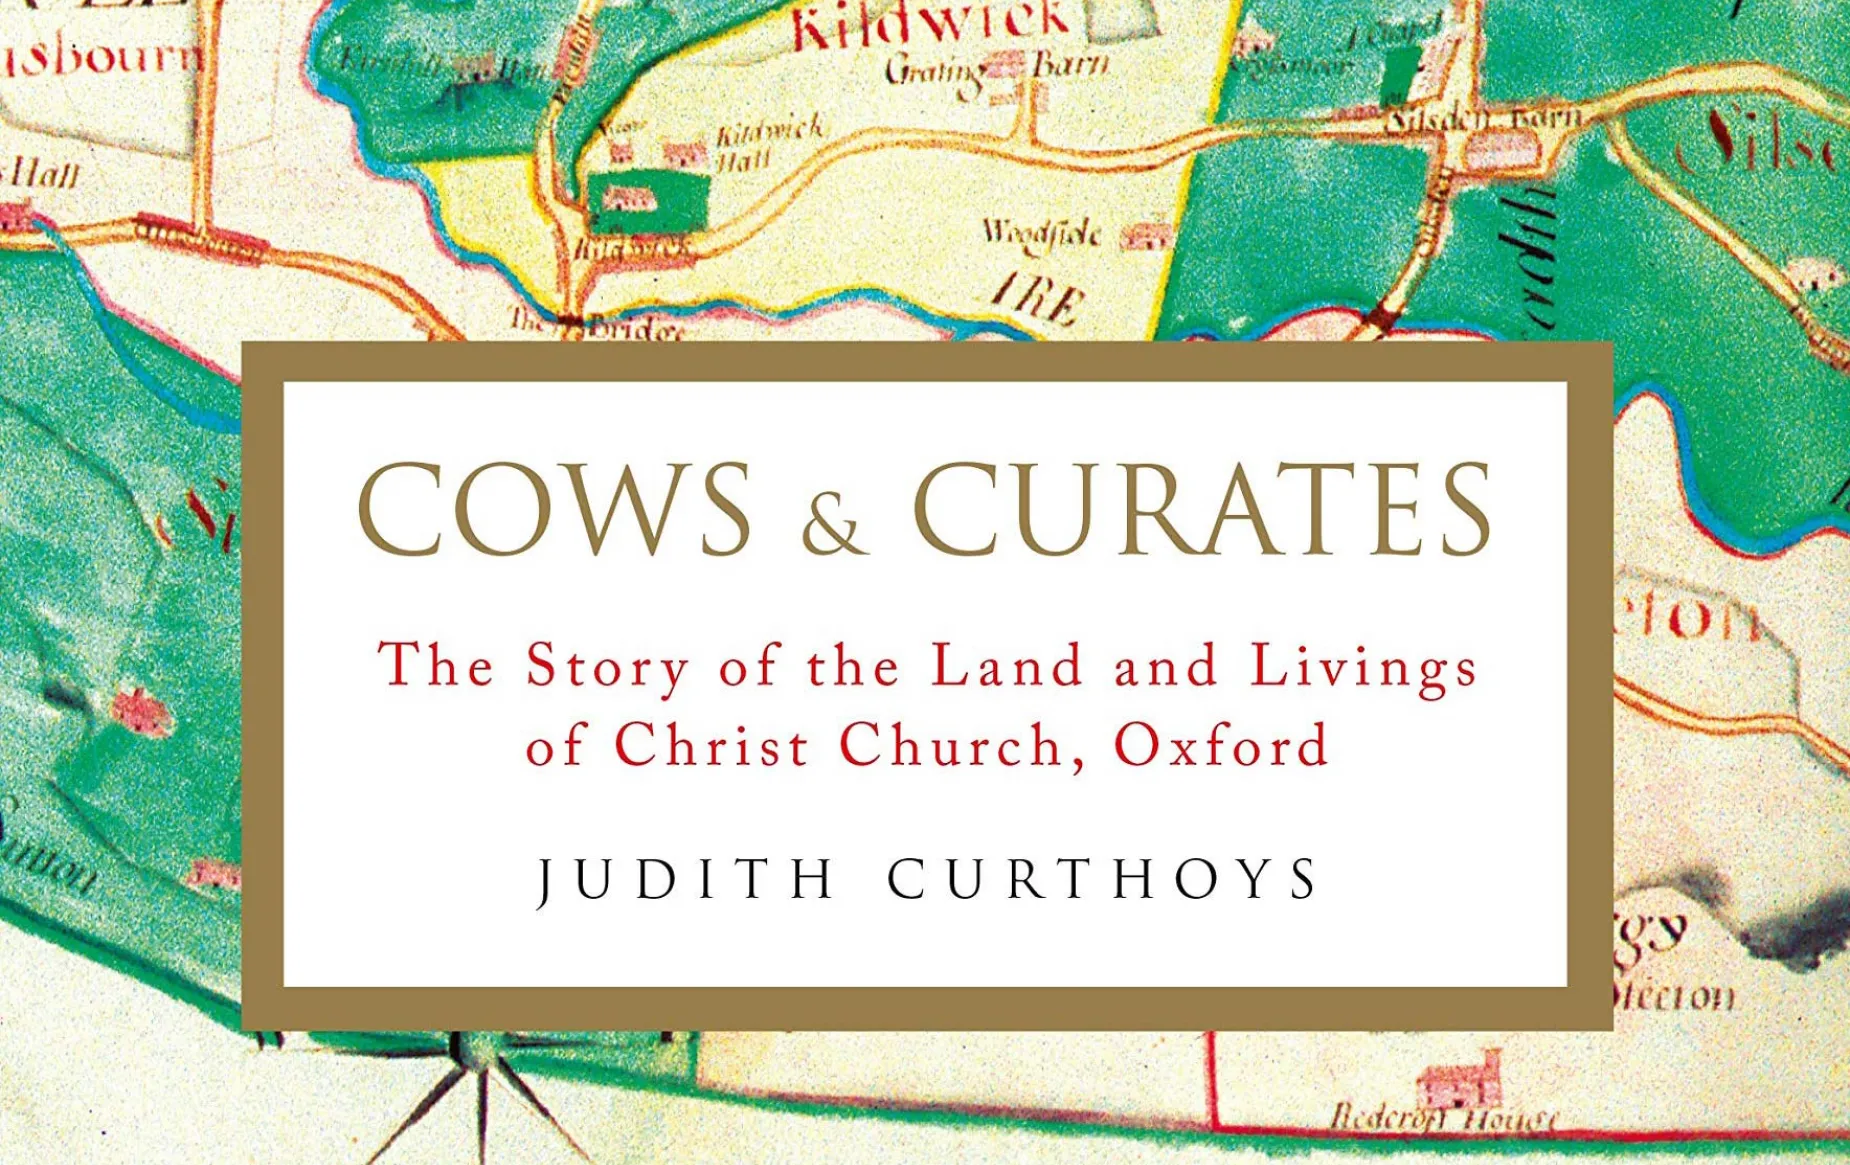 Cover of Cows & Curates by Judith Curthoys